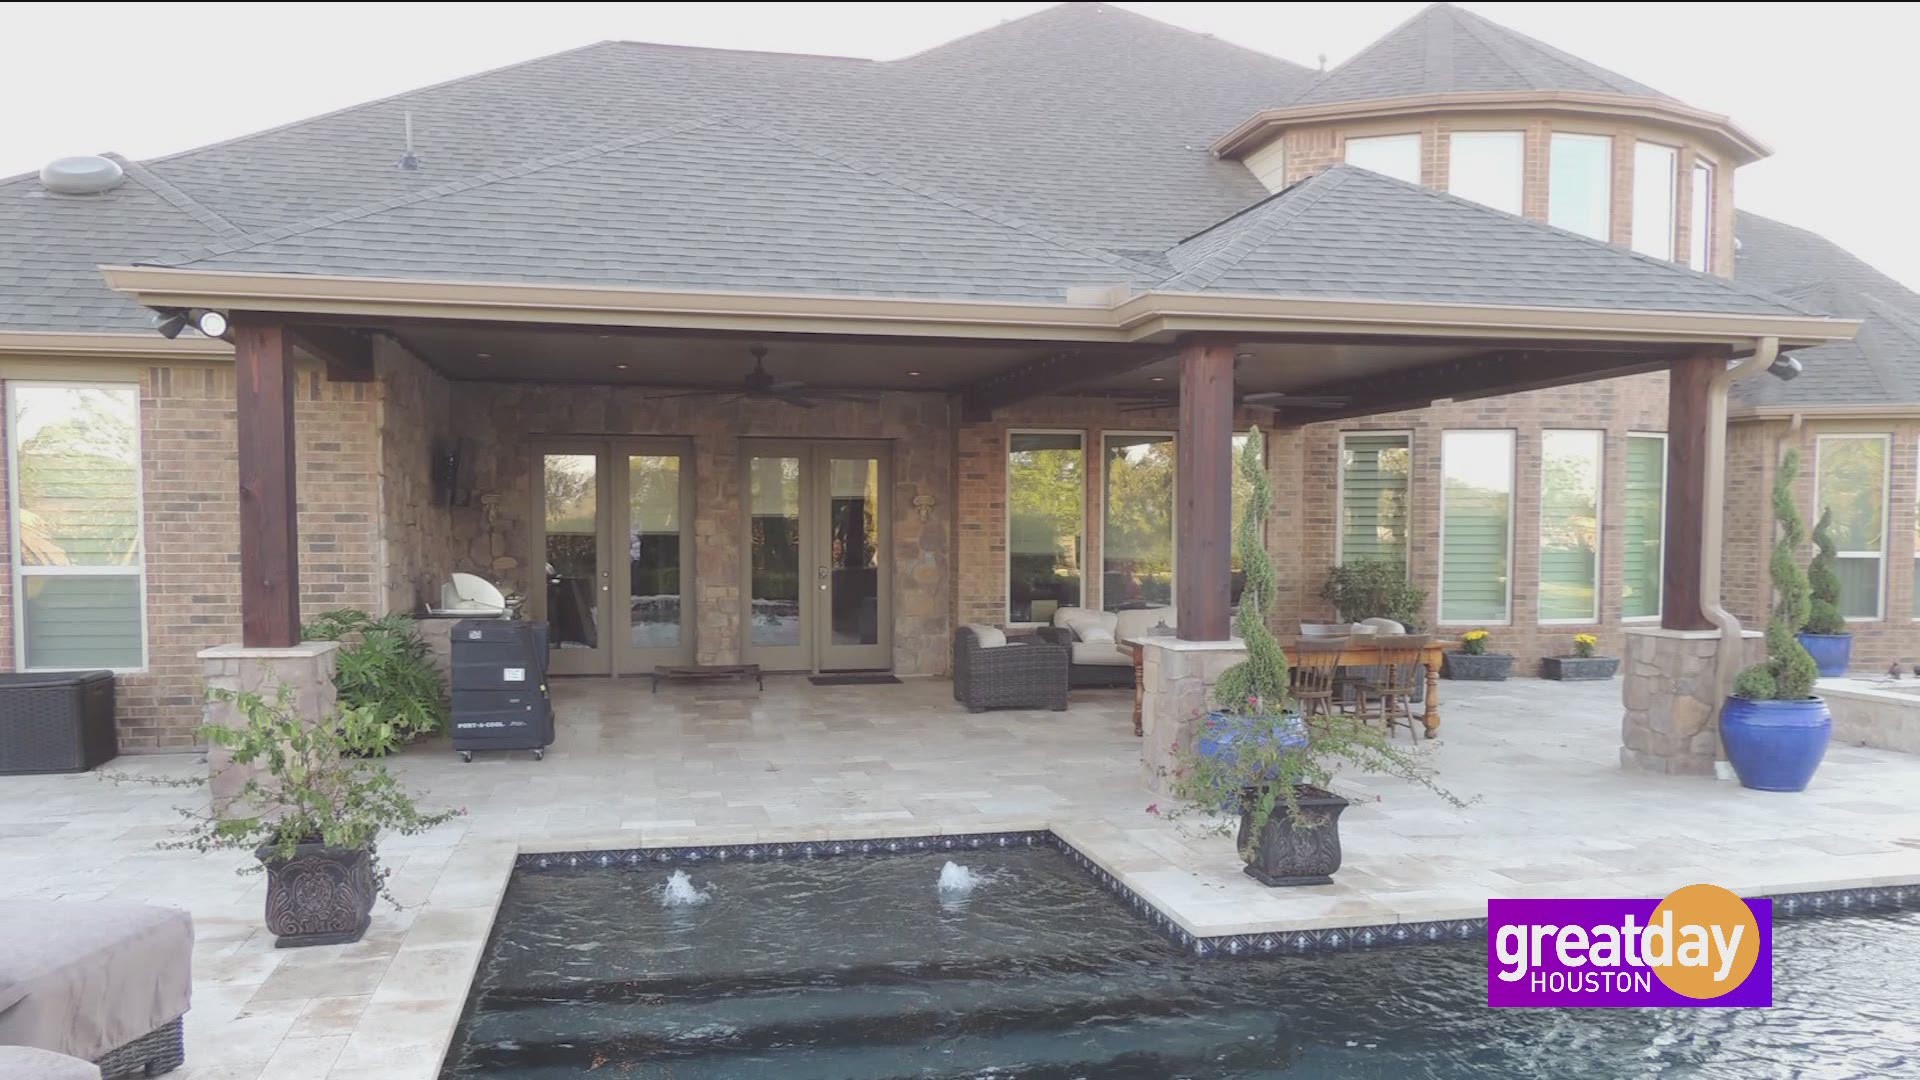 Deborah Duncan talks to the head home pro at Keystone Homepros, Leonard Courtright, about making your home flow beautifully from the indoors to outdoor living space.